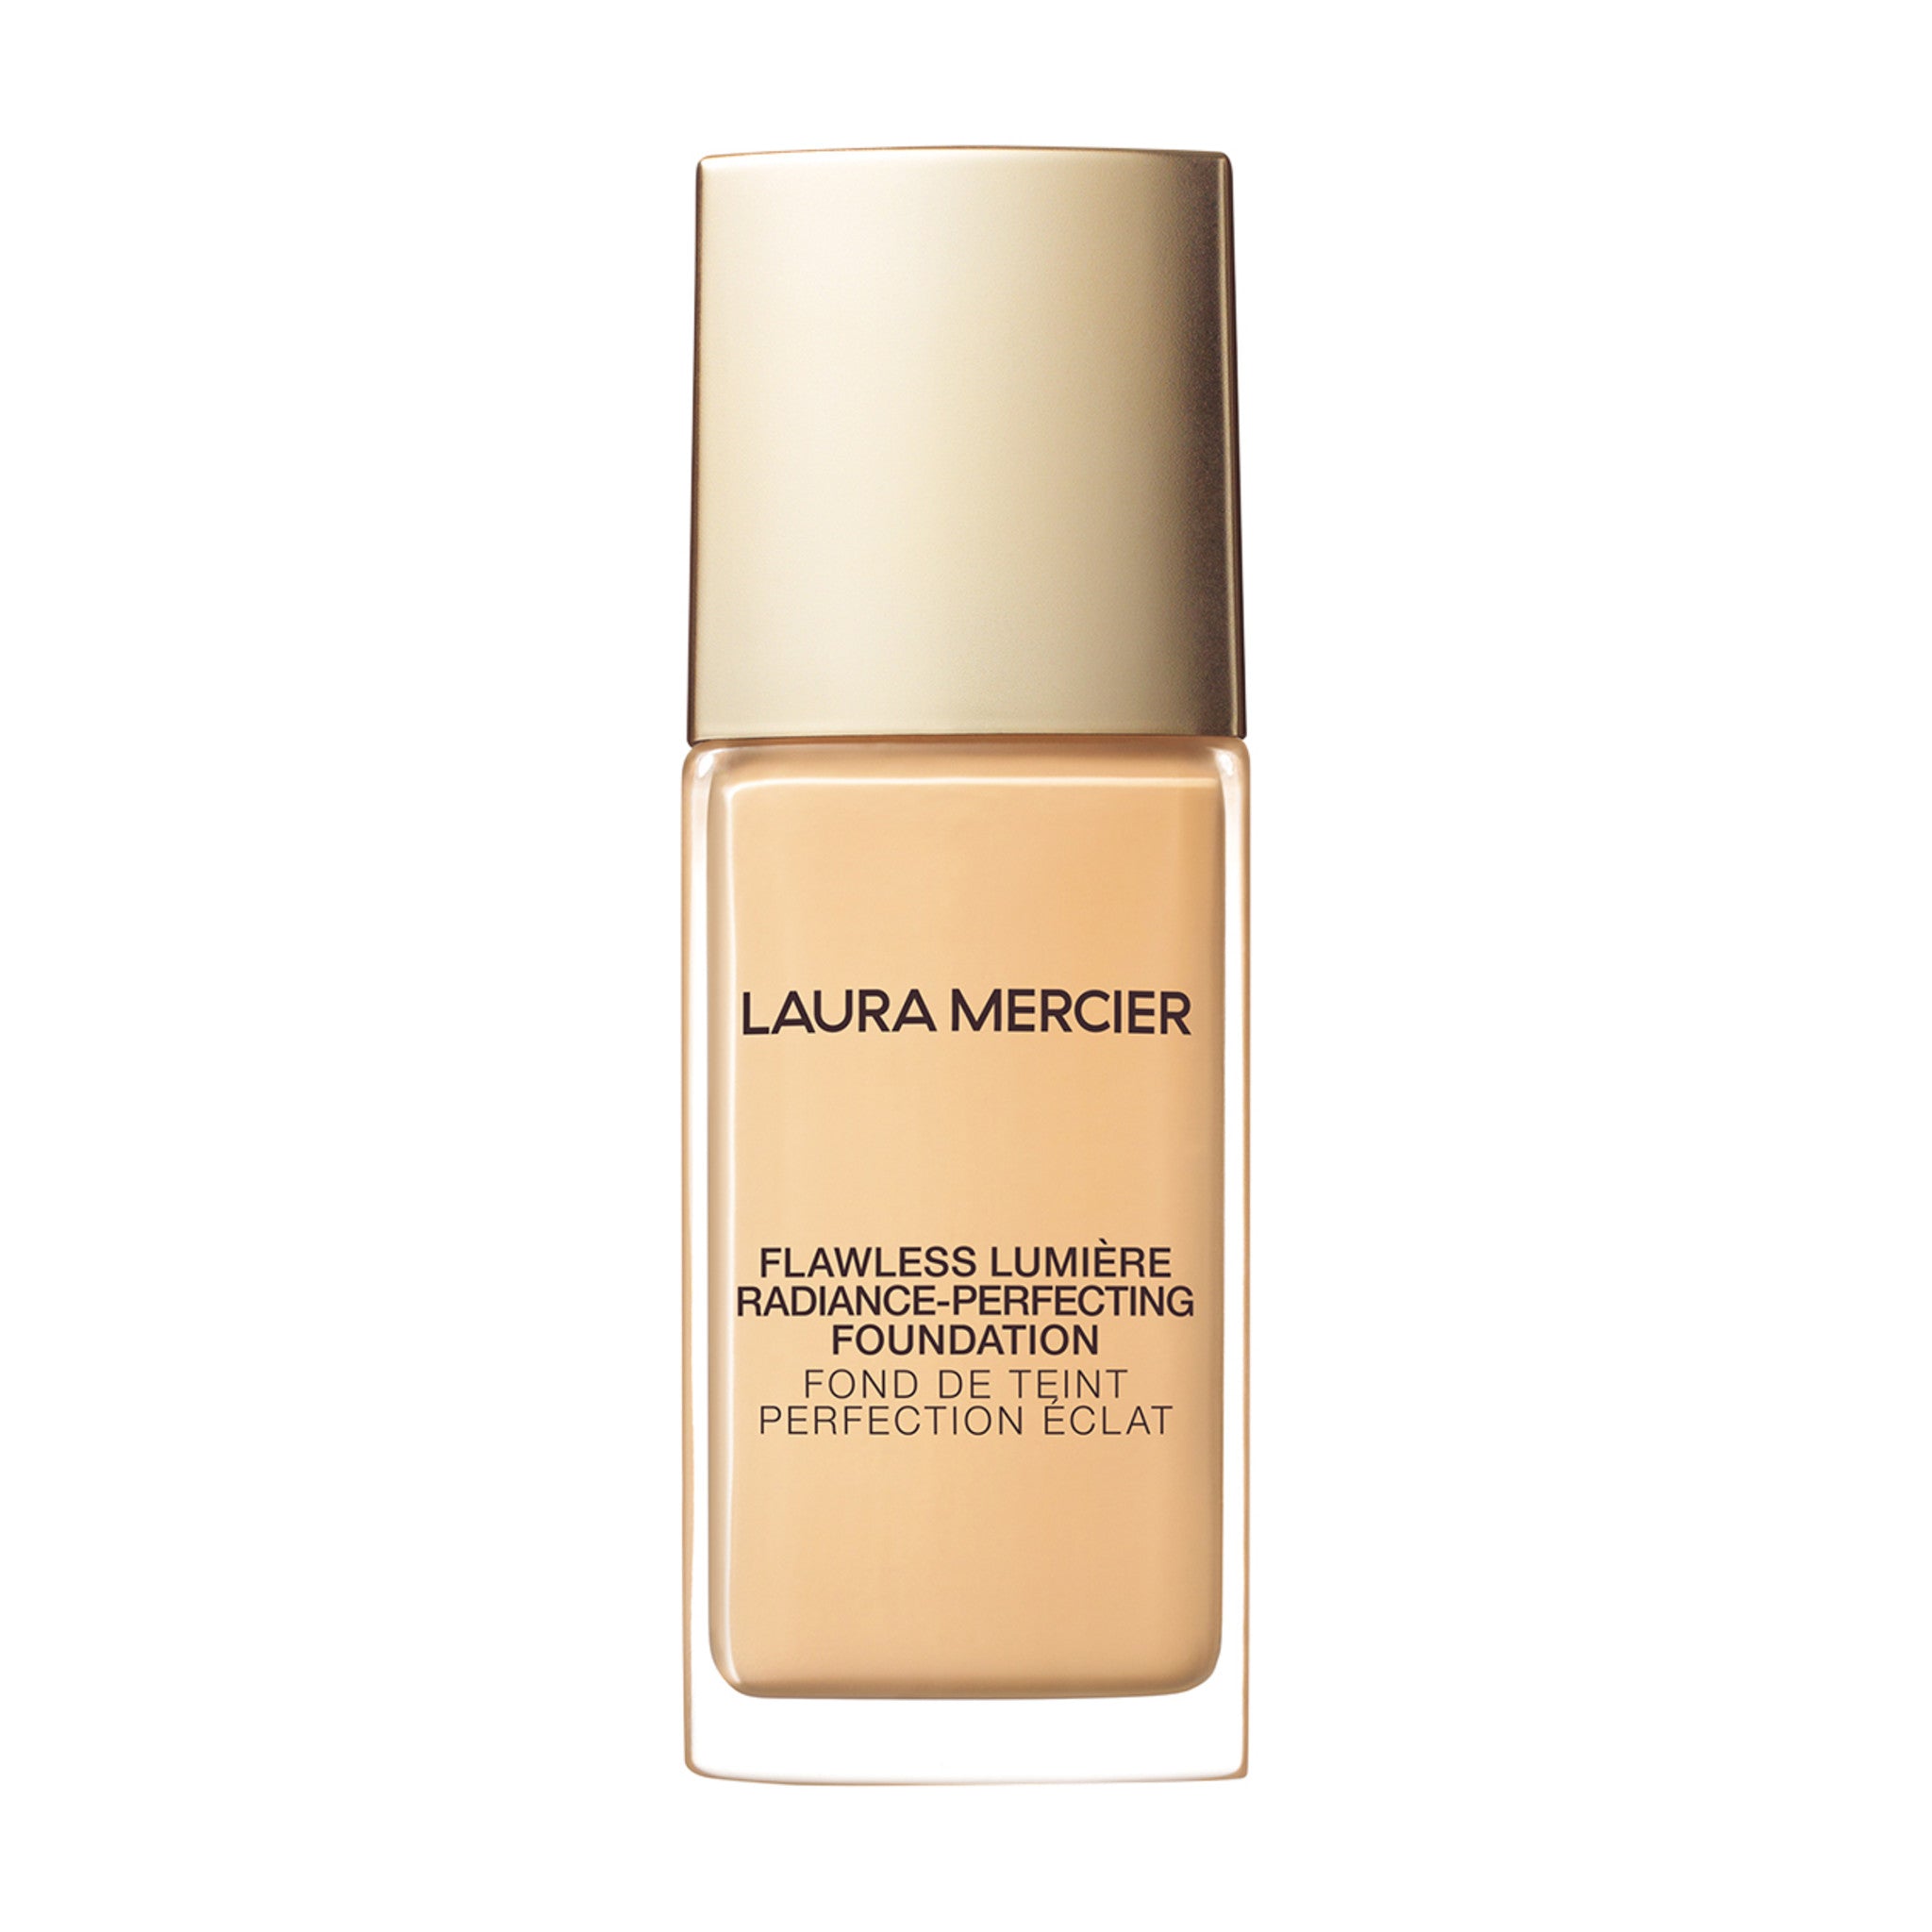 Flawless Lumière Radiance-Perfecting Foundation main image.